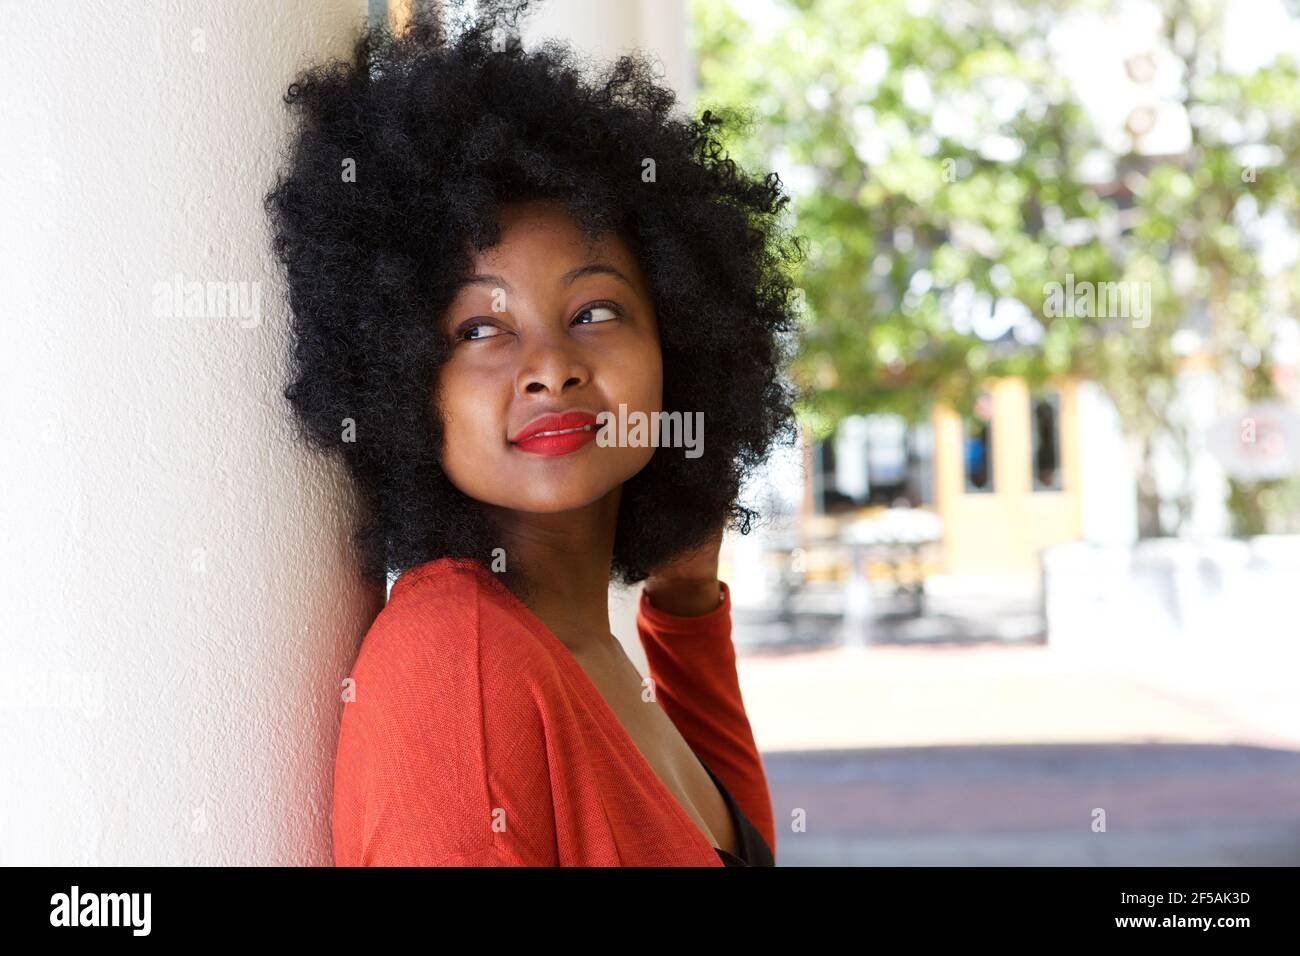 Close up portrait of young woman outside leaning against wall daydreaming Stock Photo